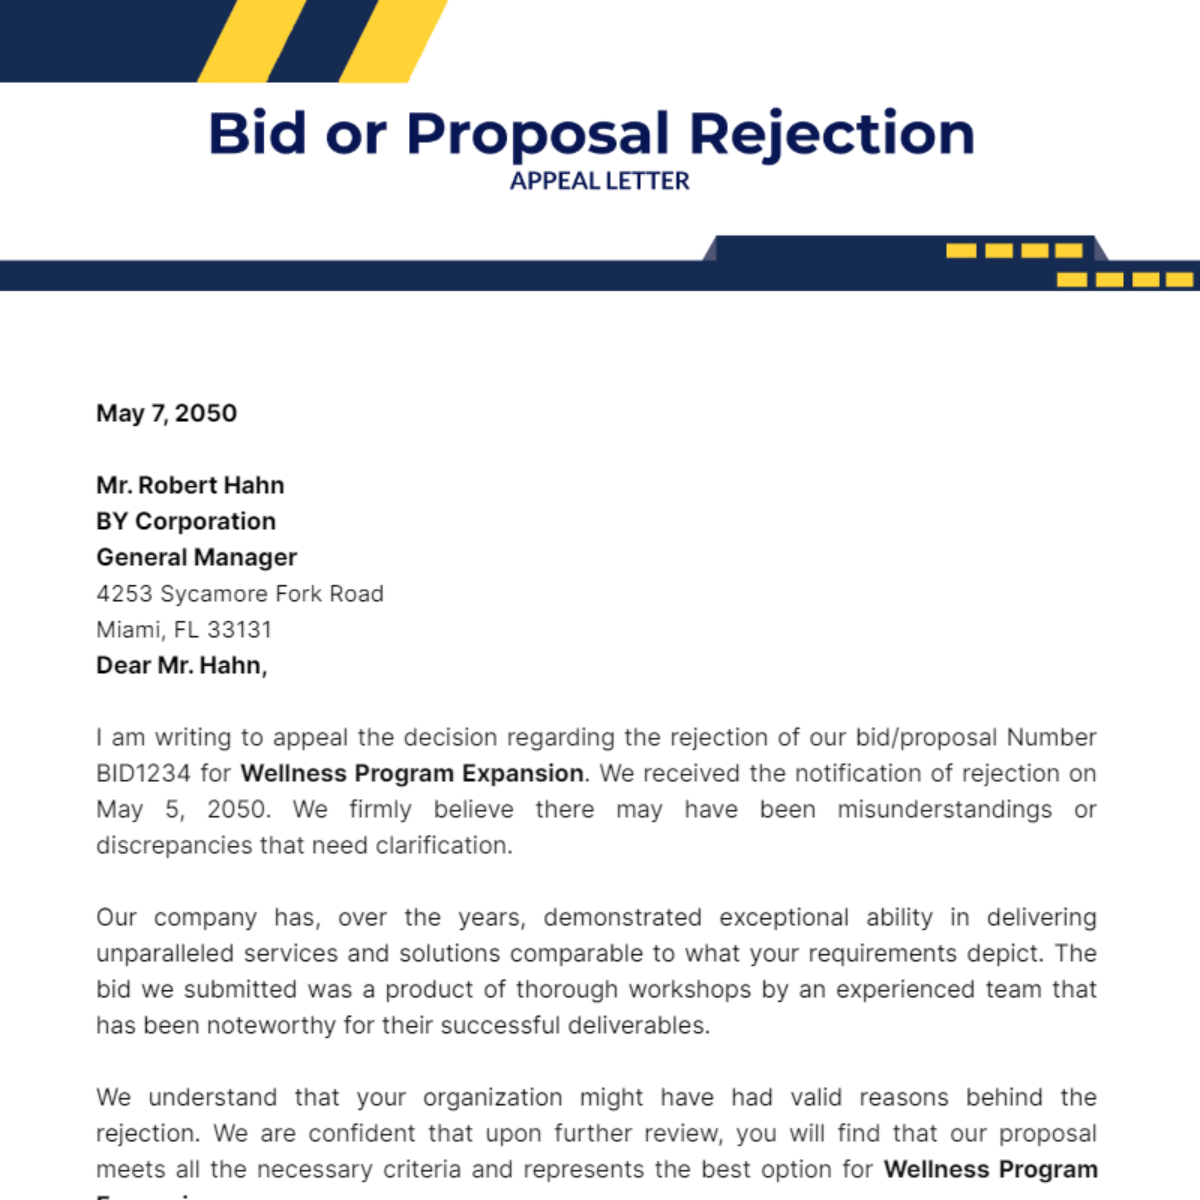 Bid or Proposal Rejection Appeal Letter Template